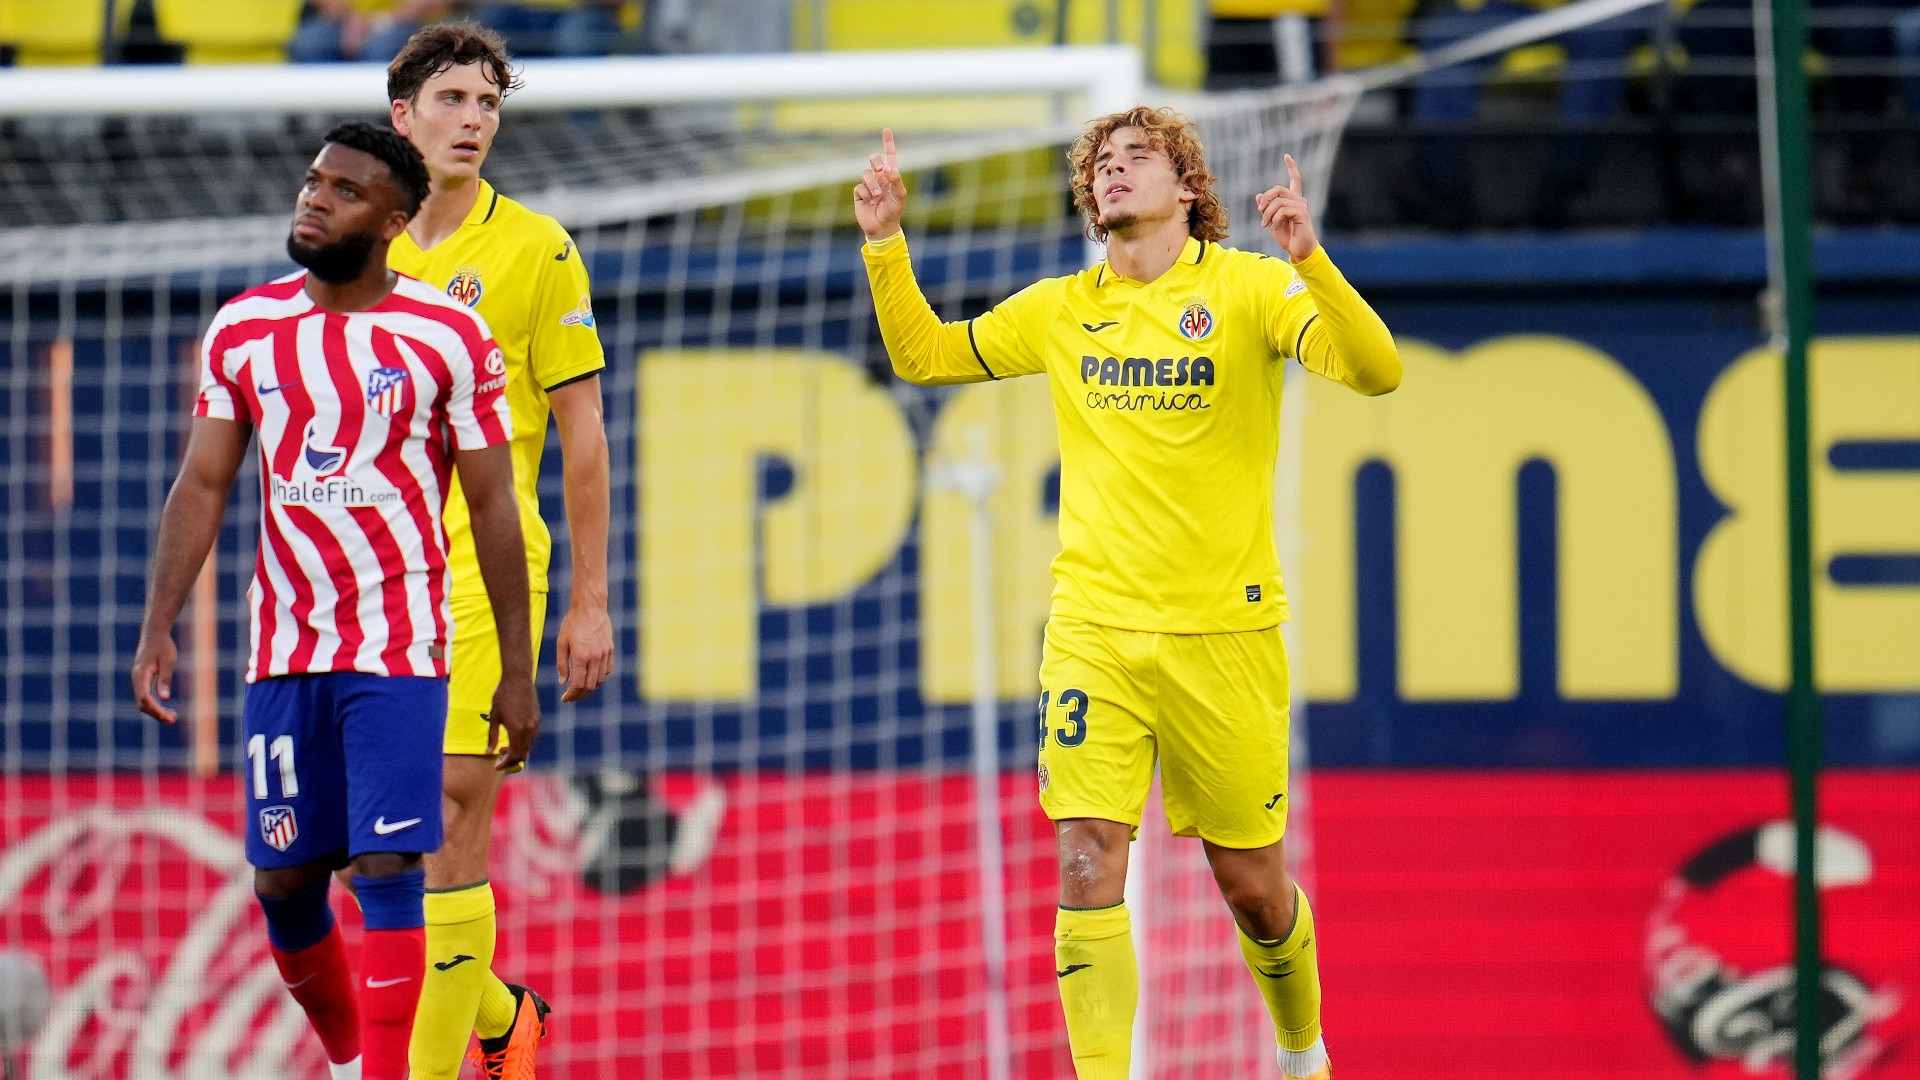 Late Pascual leveller denies Atleti second place